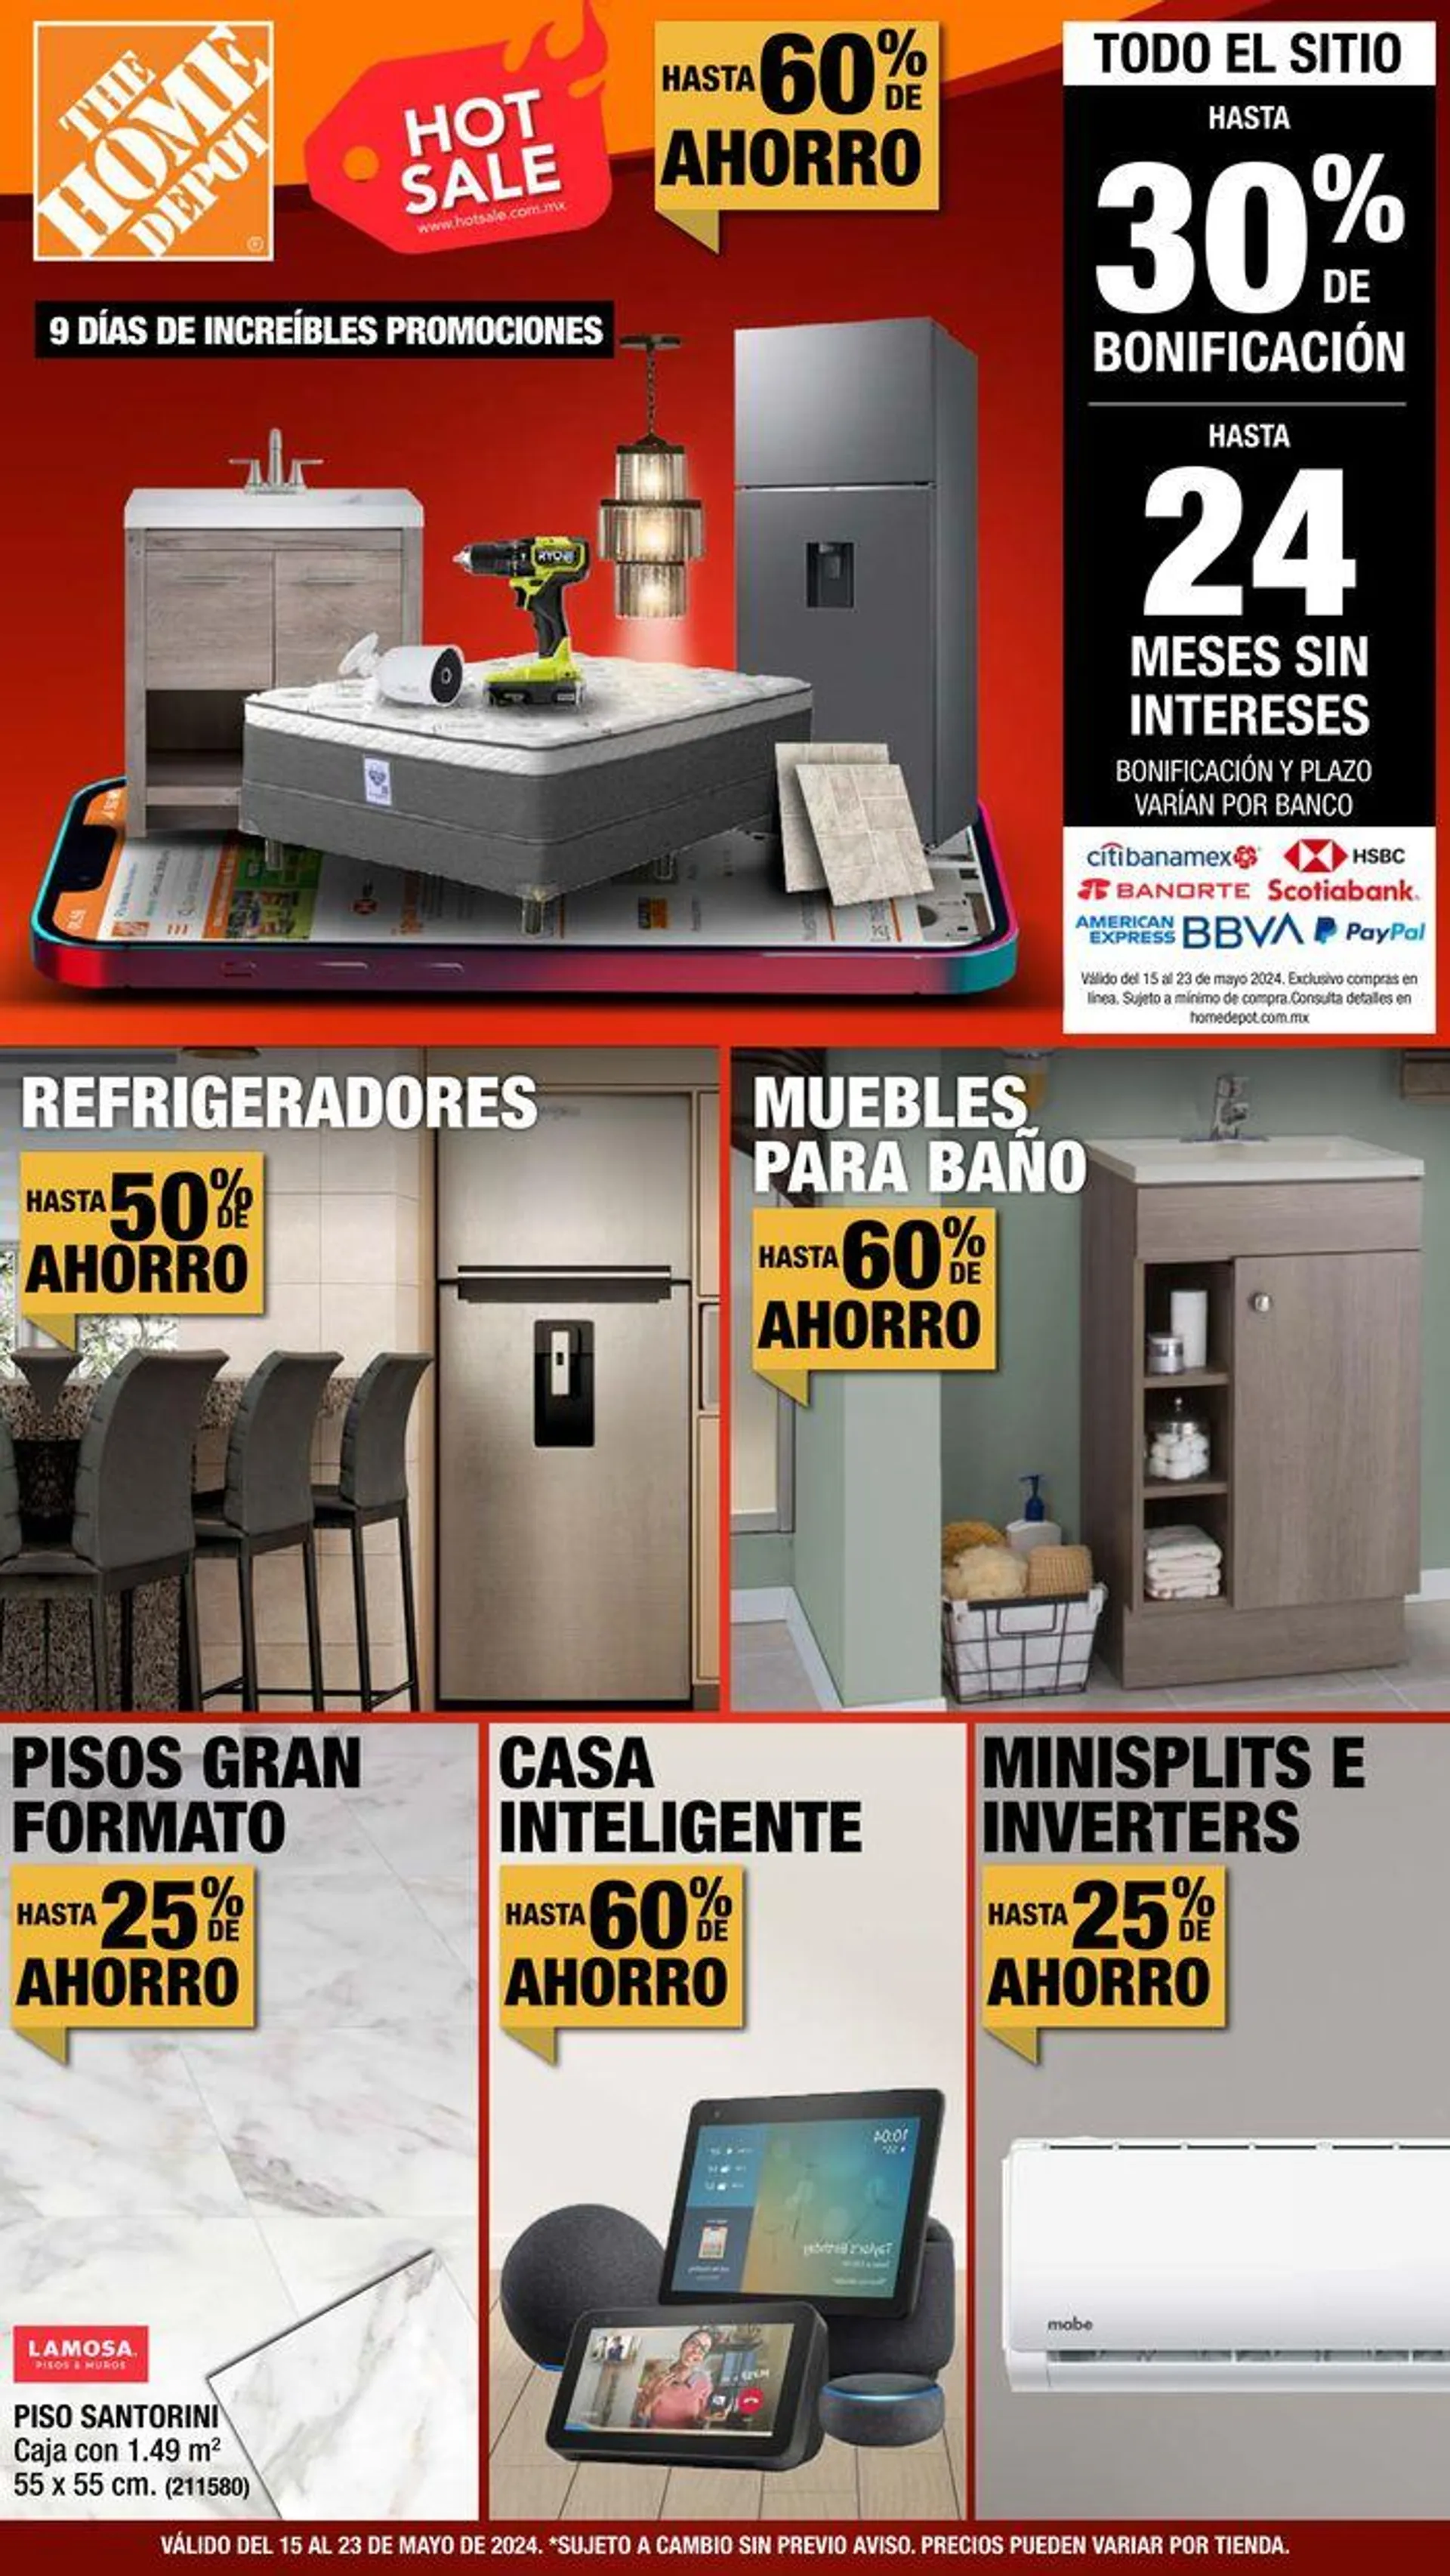 The Home Depot - Hot Sale  - 1